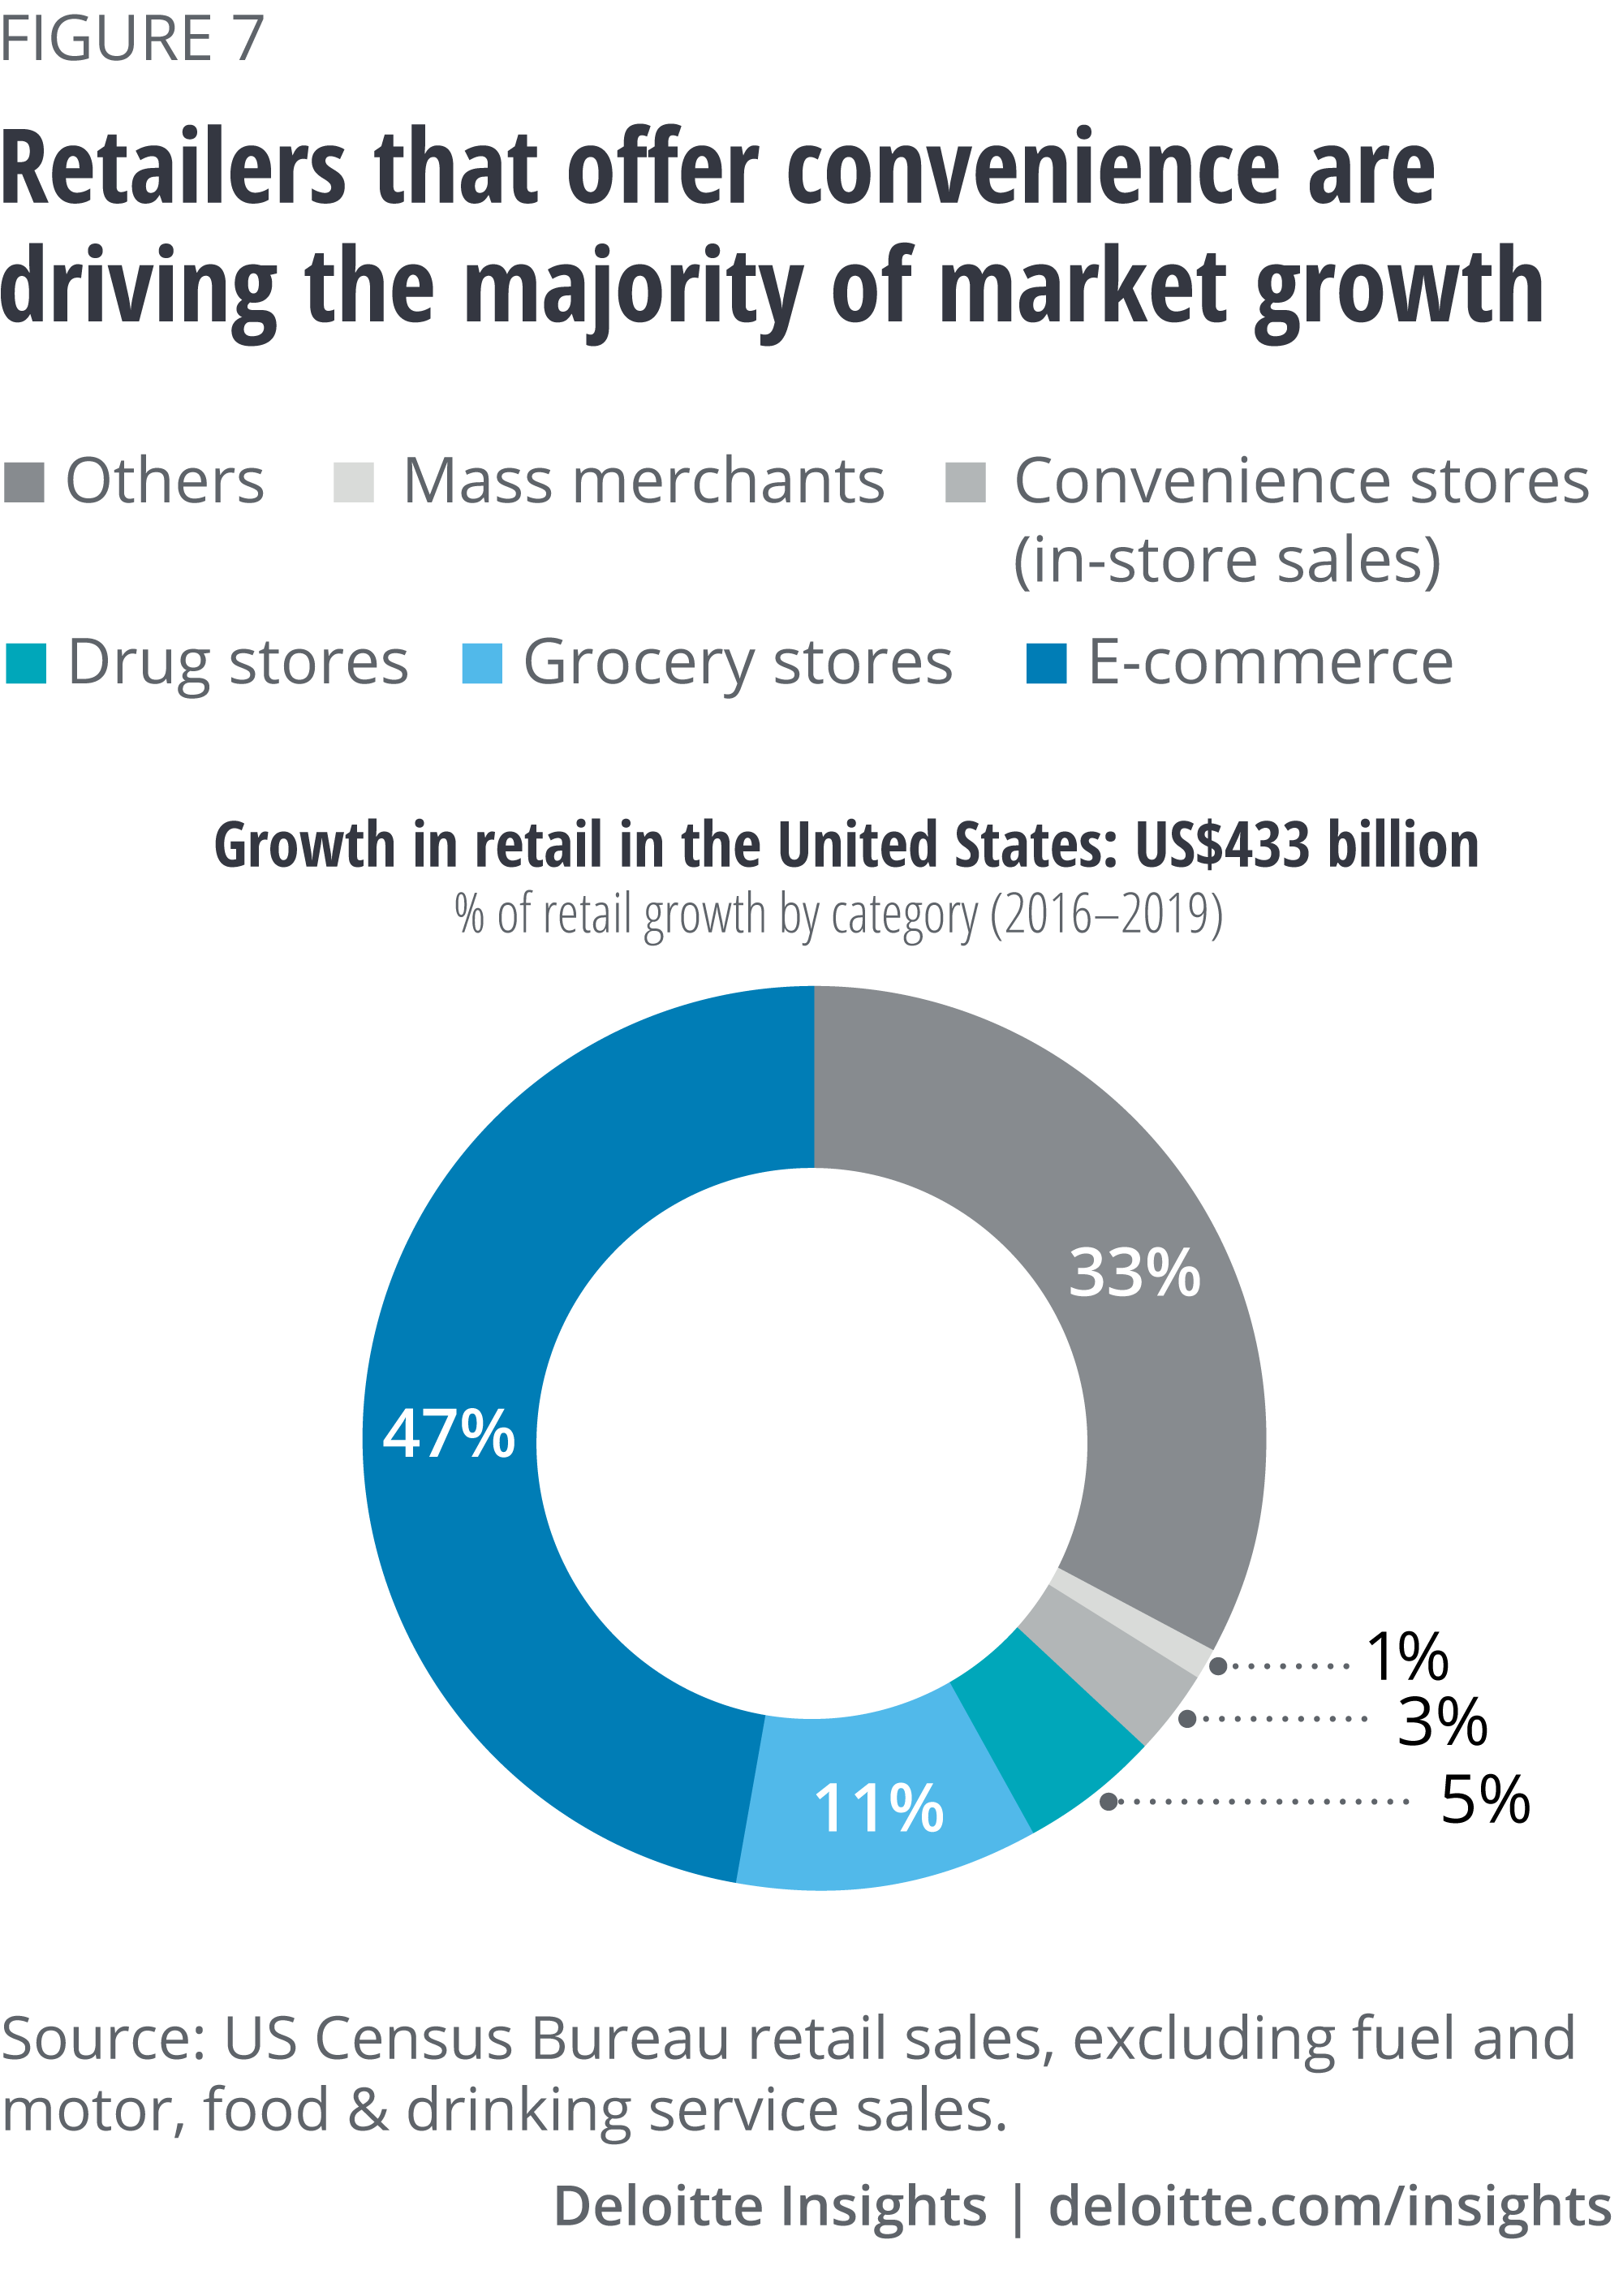 Retailers that offer convenience are driving the majority of market growth